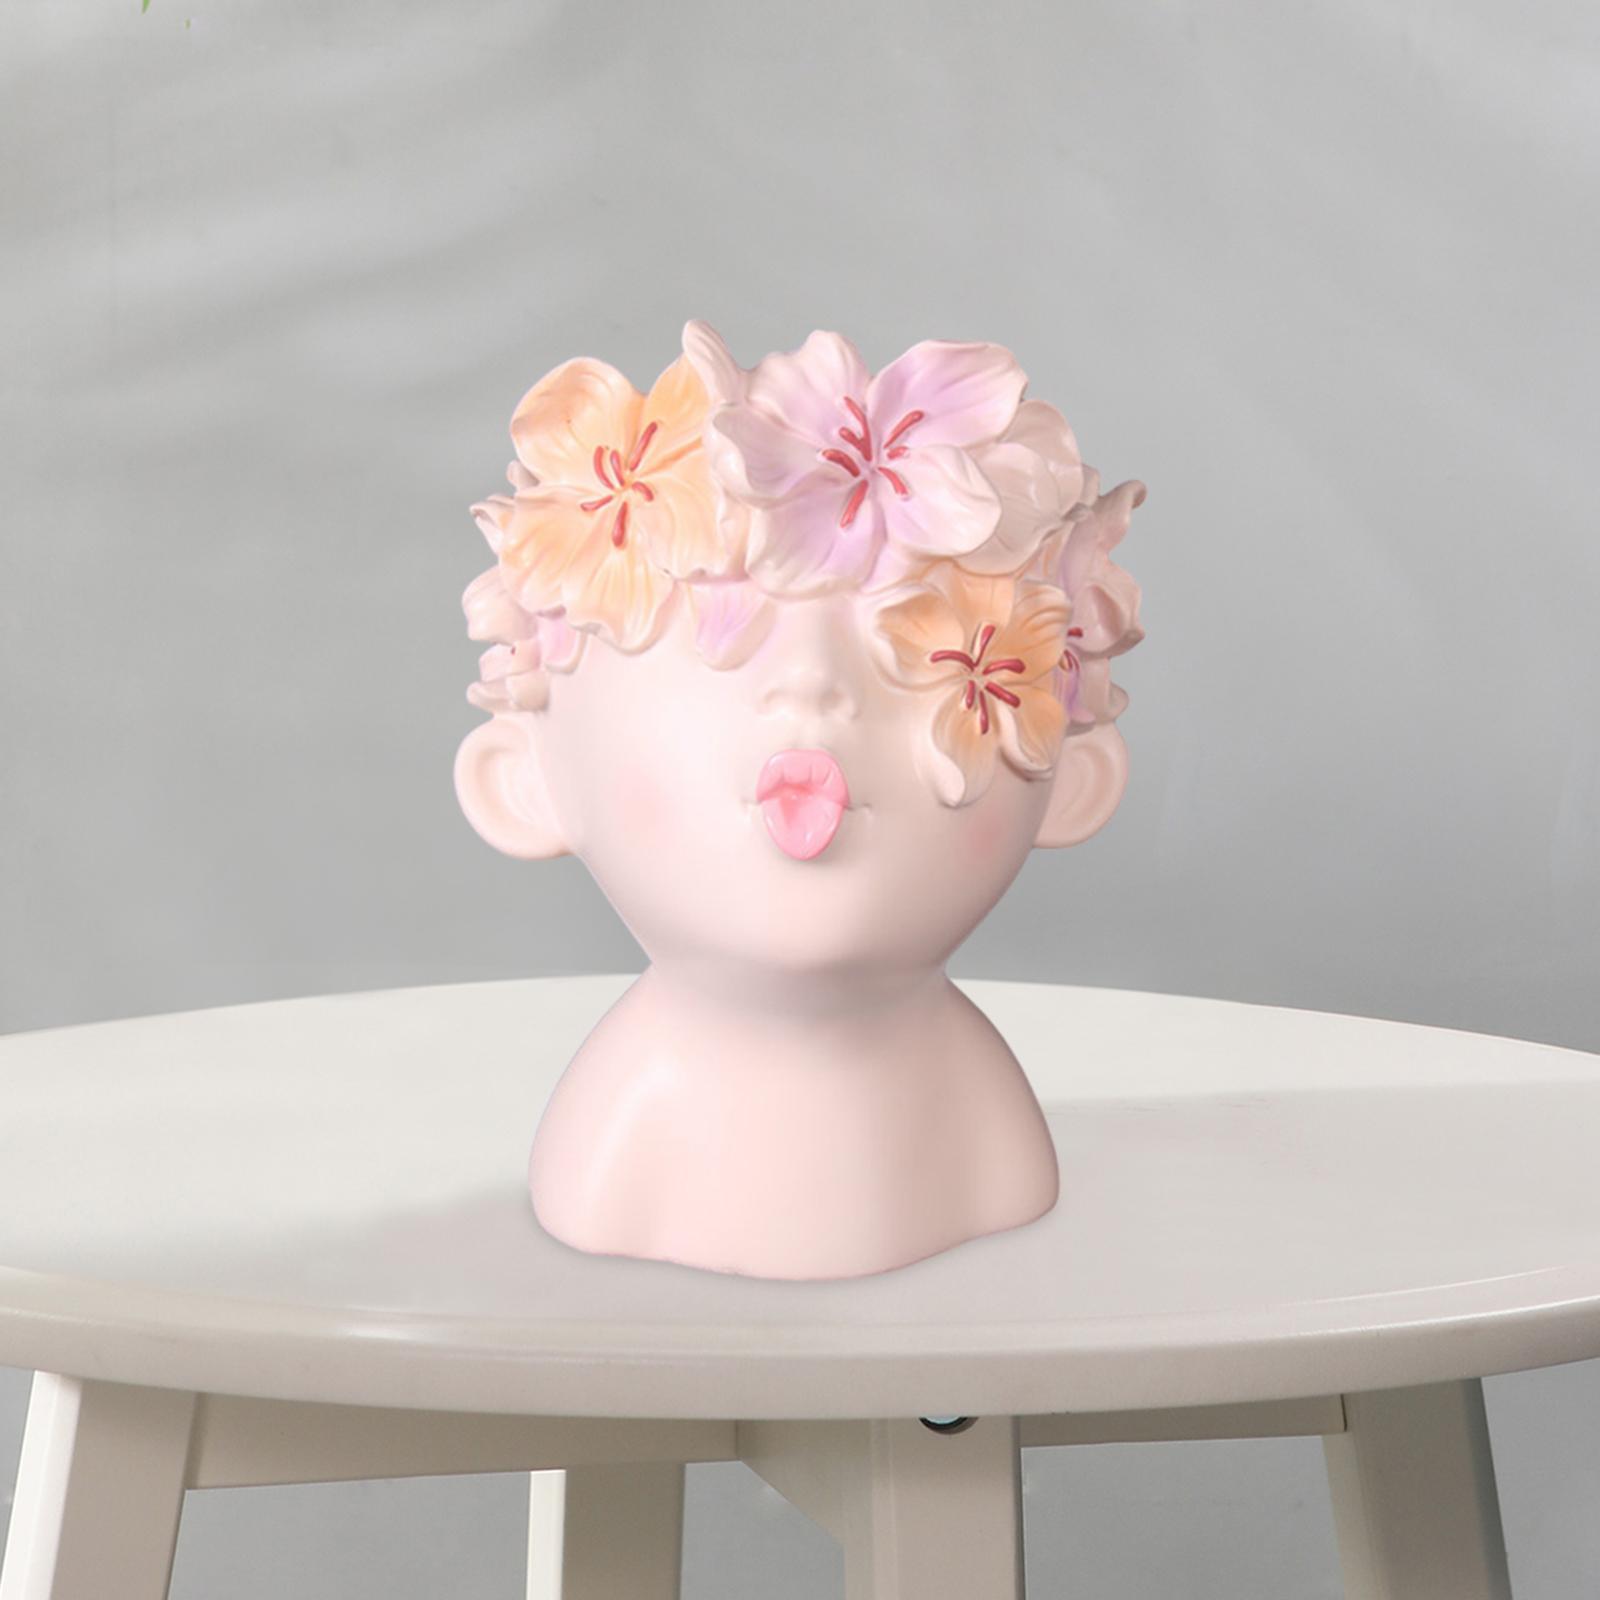 Head Planter Gift Tabletop Crafts Sculpture Statue Vase for Party Home Decor